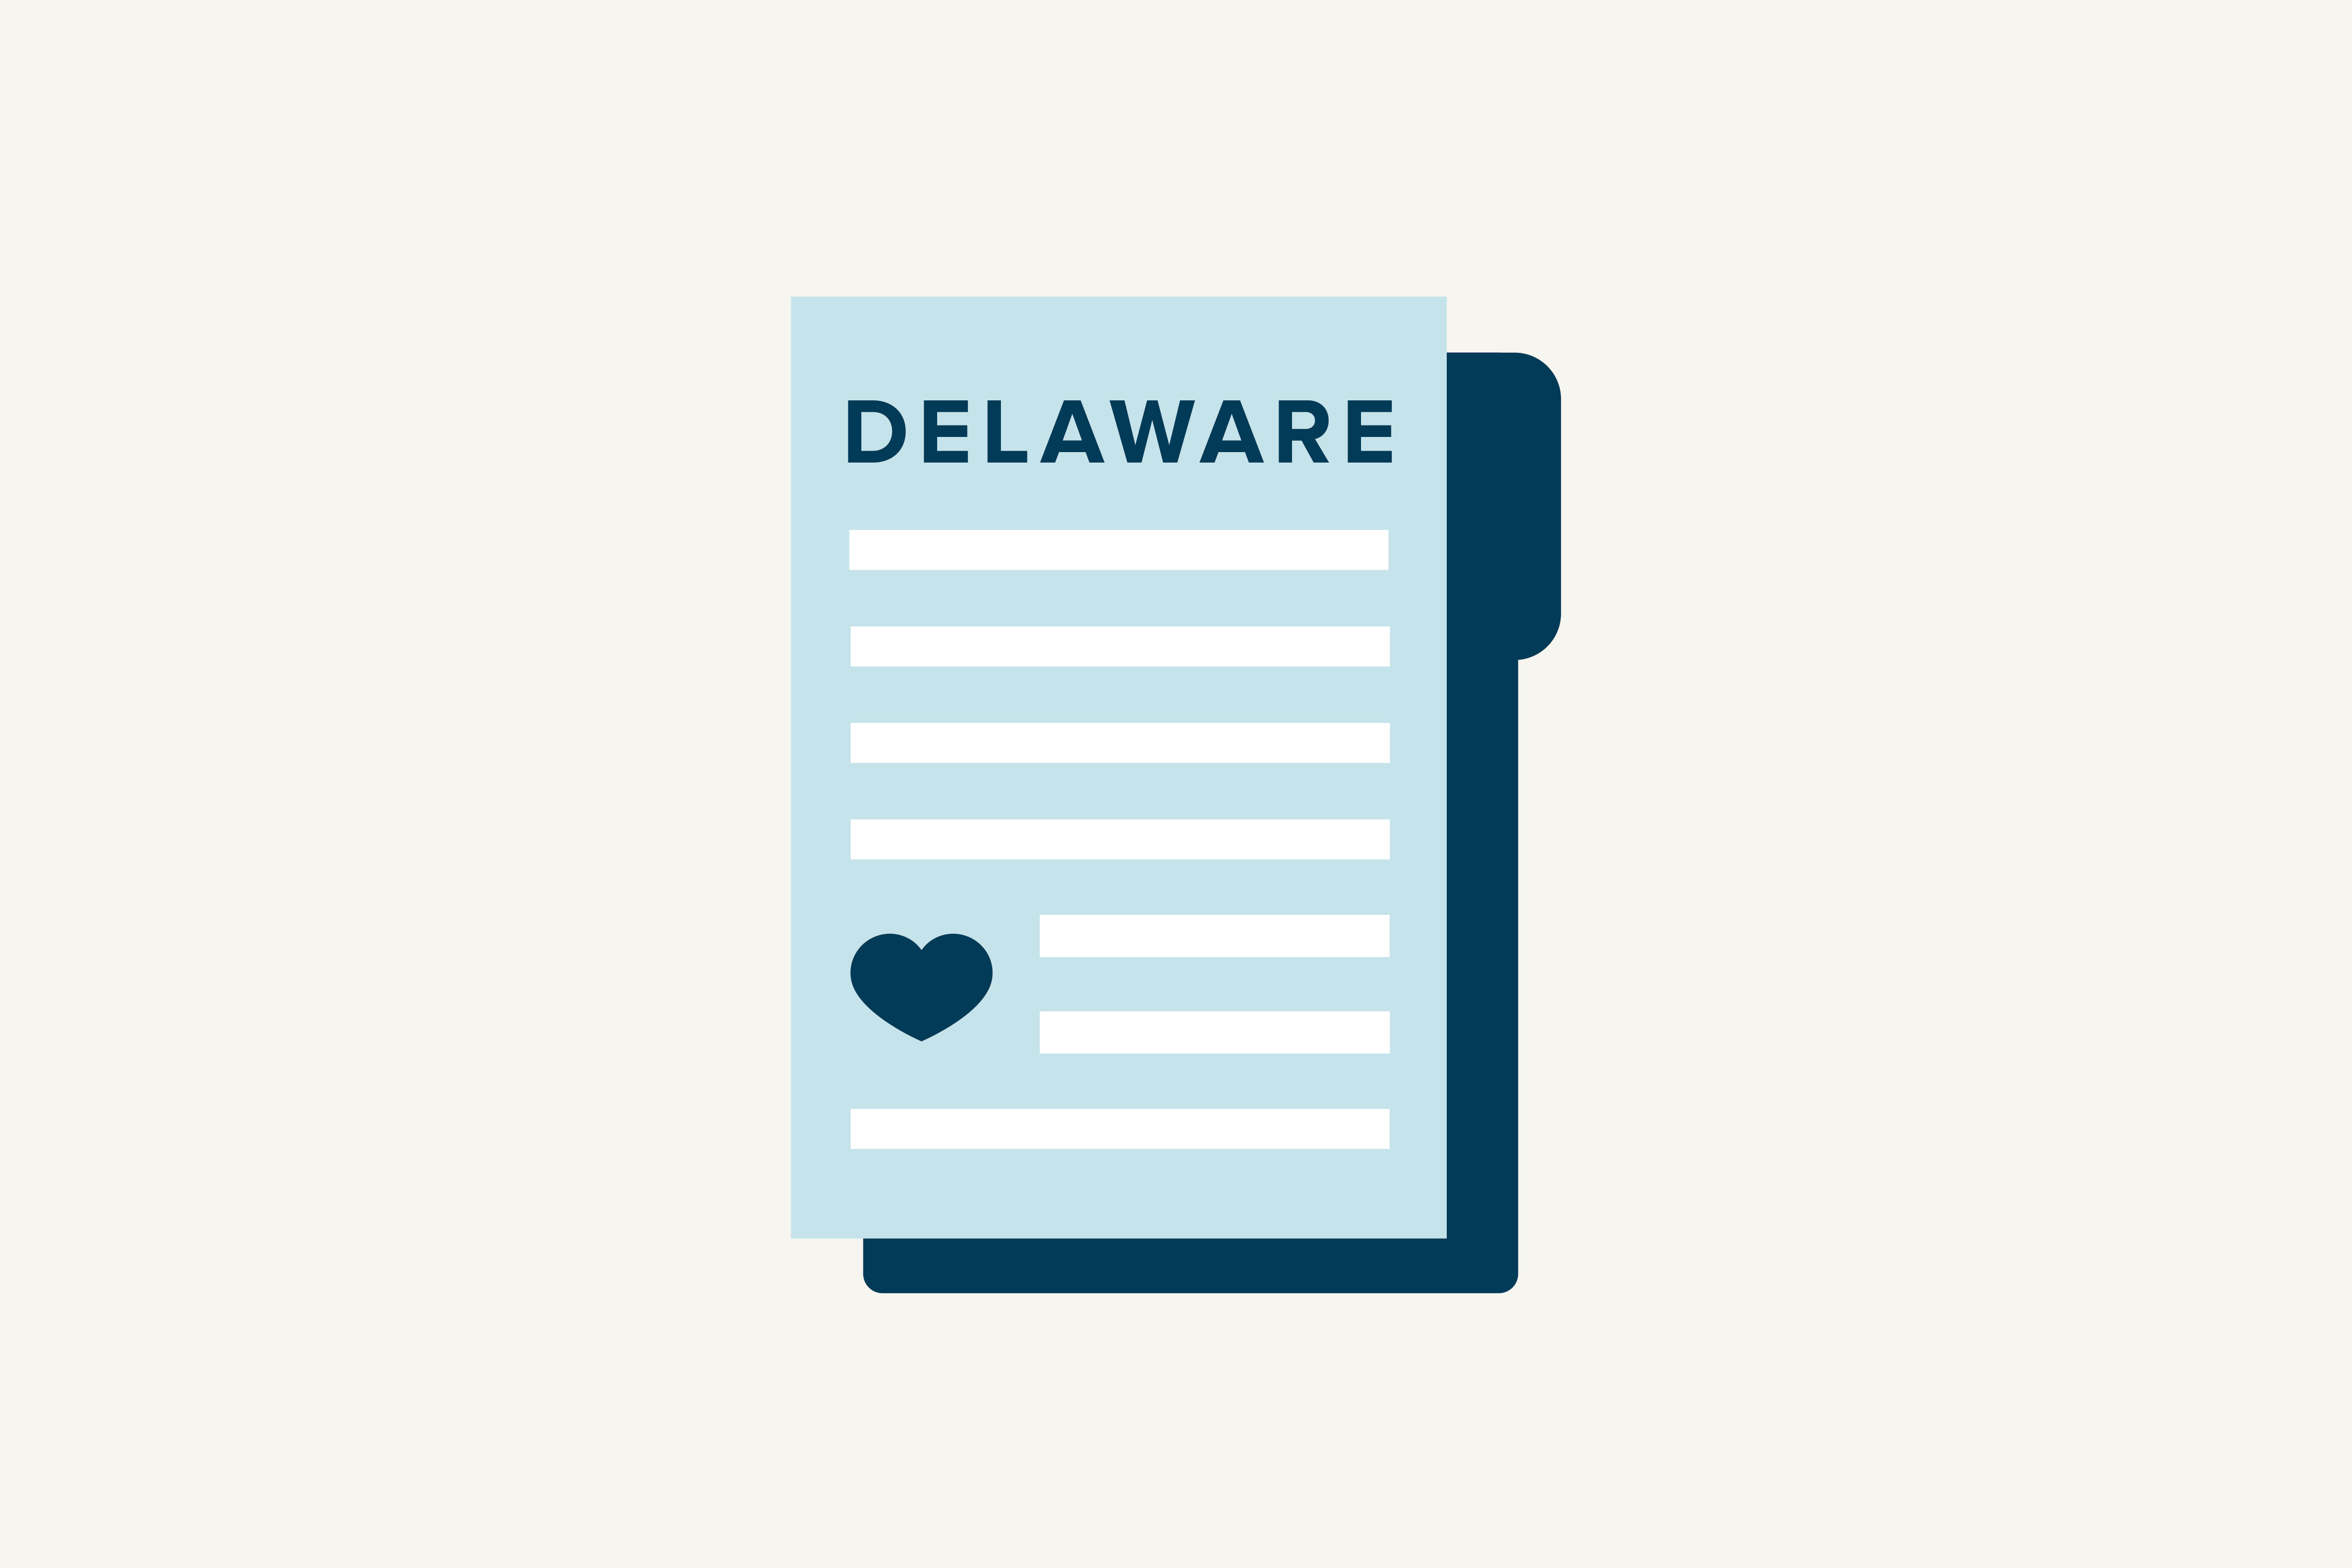 Delaware Marriage Laws